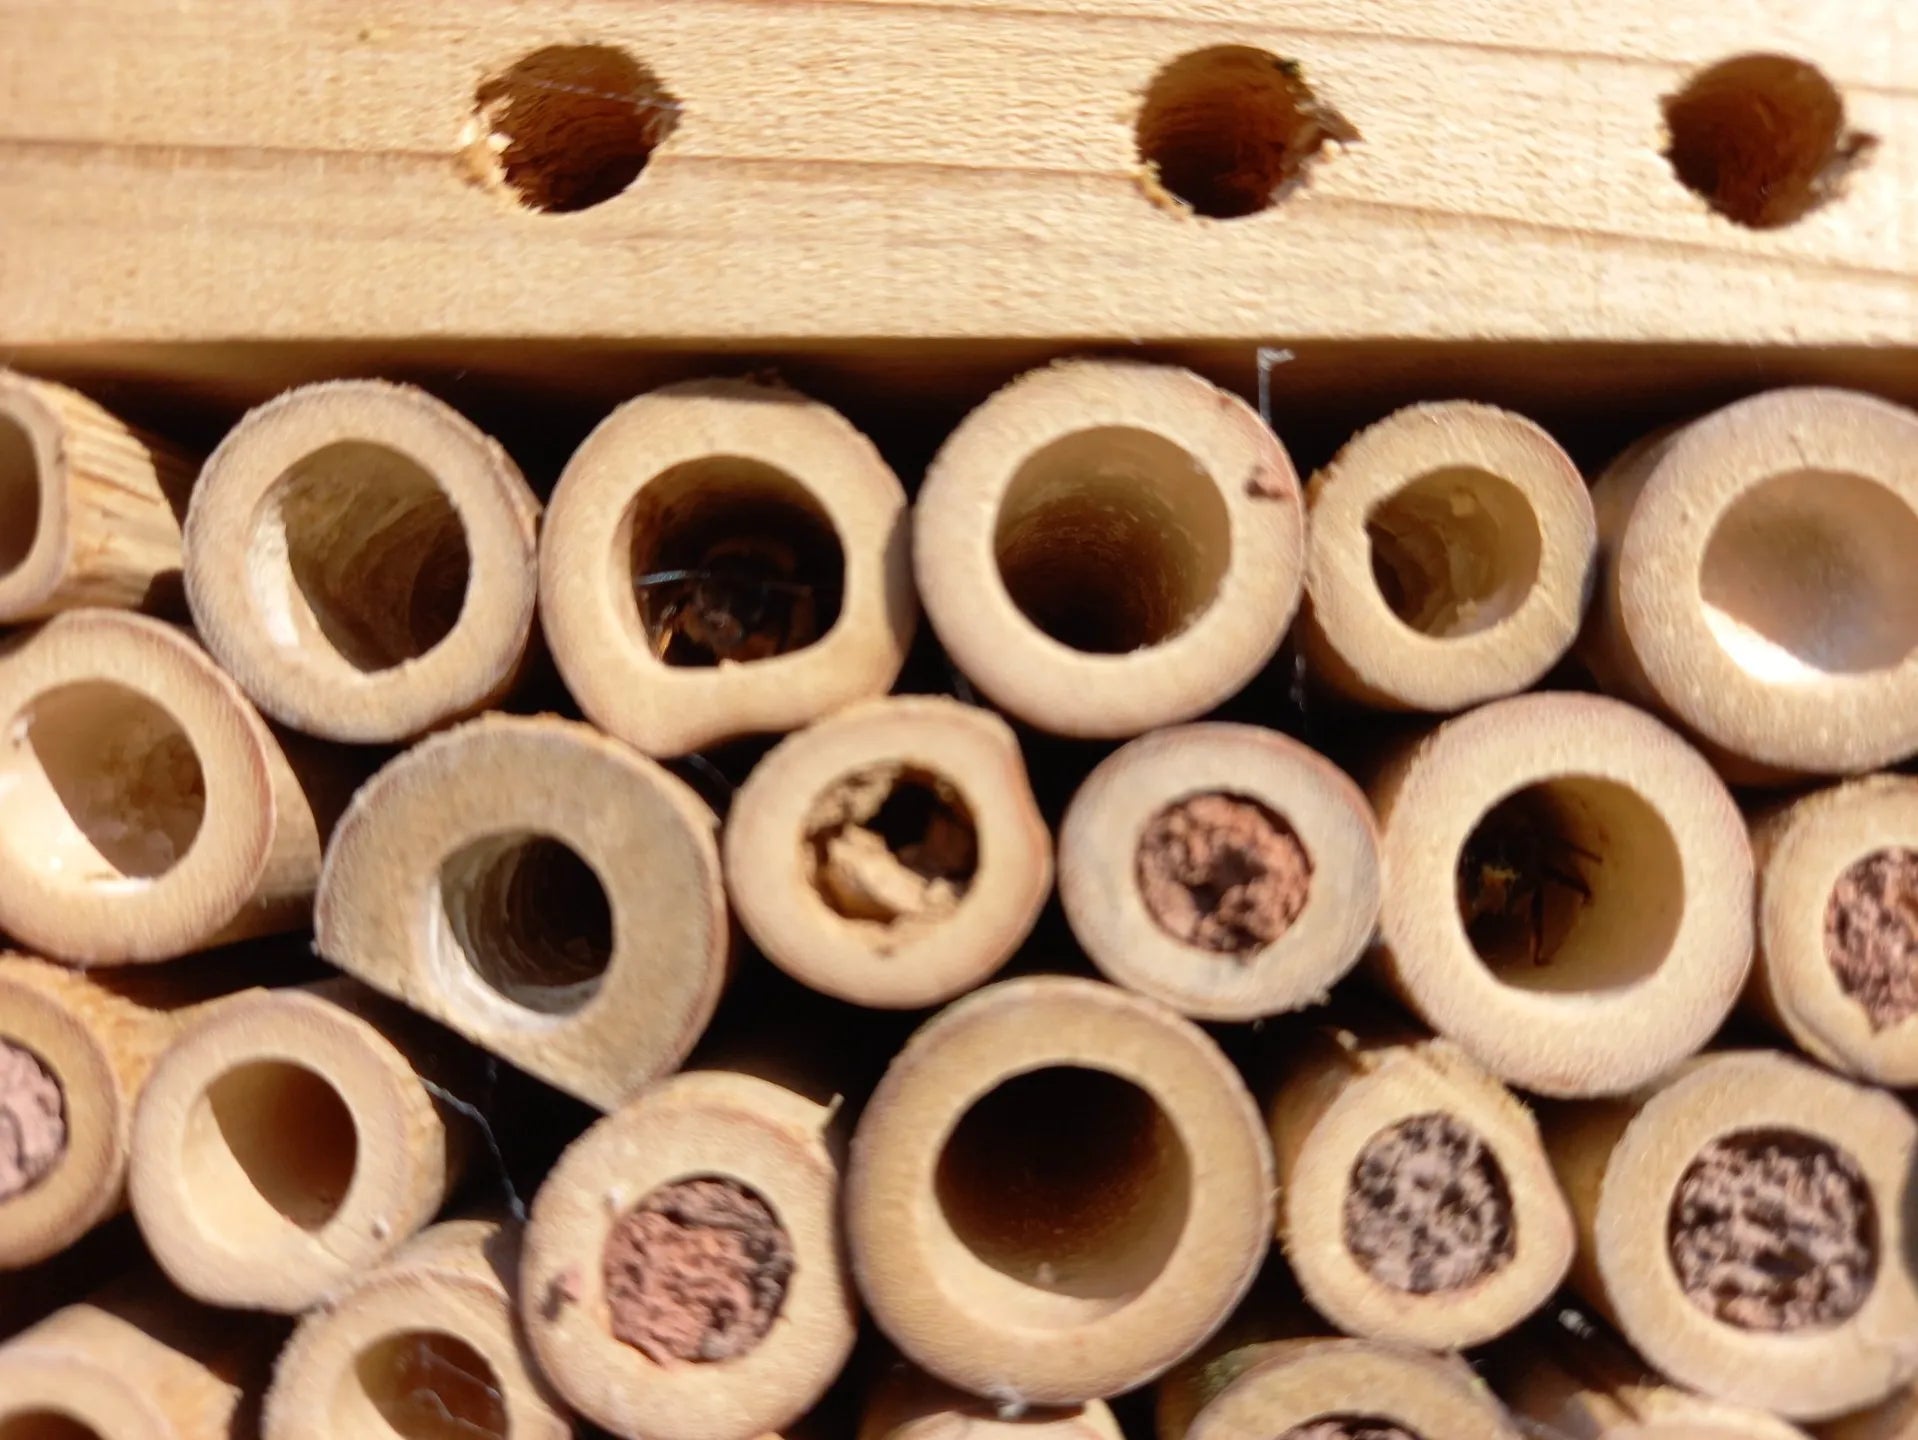 Can you spot the mason bees?